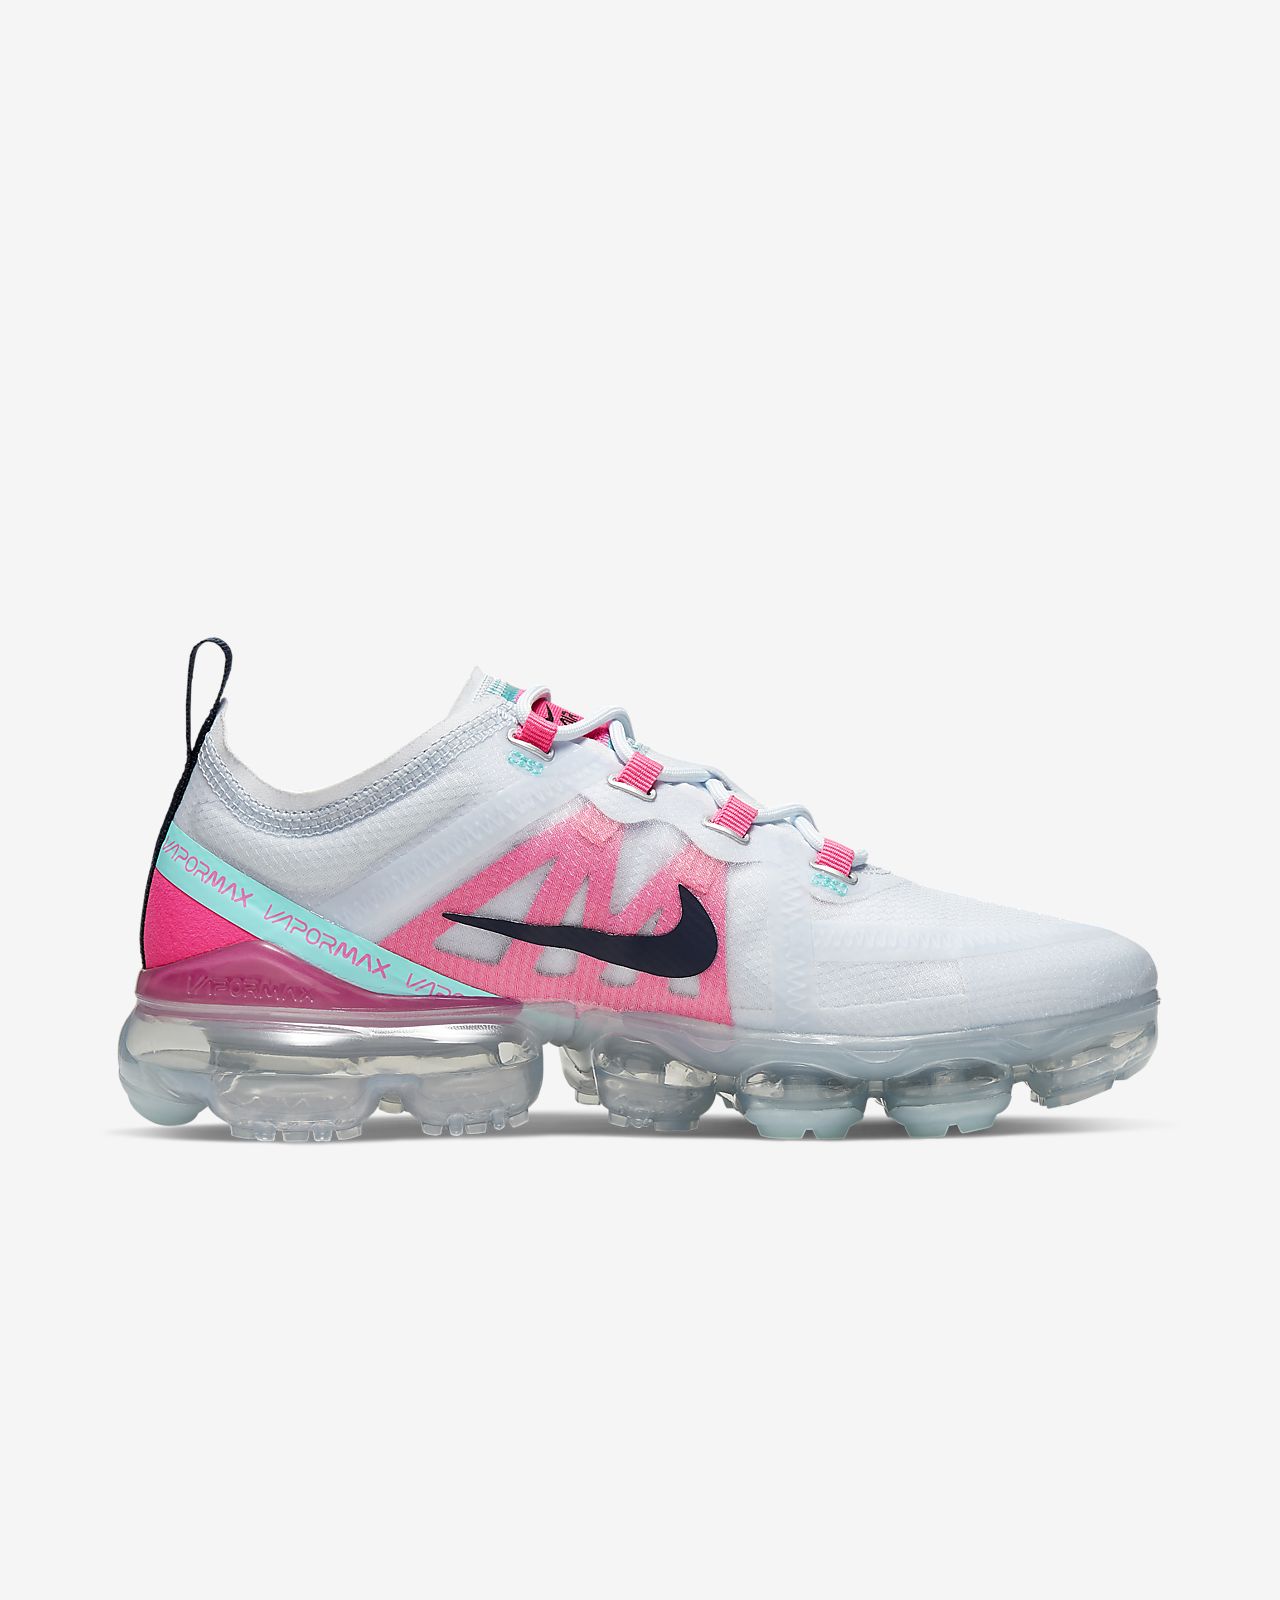 nike vapormax womens pink and white